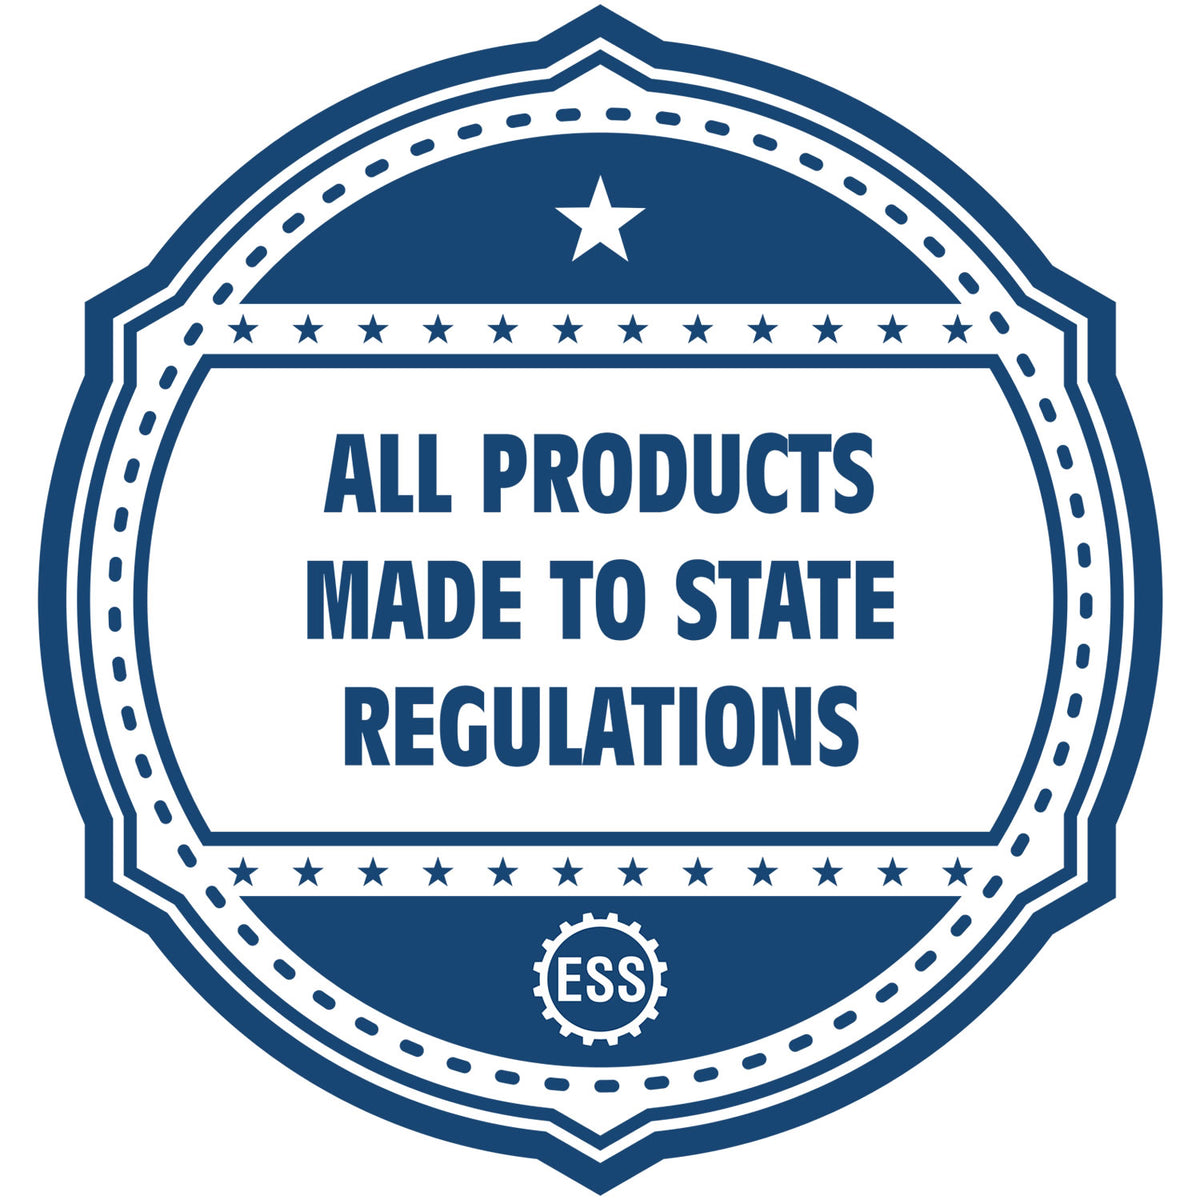 An icon or badge element for the Heavy-Duty Washington Rectangular Notary Stamp showing that this product is made in compliance with state regulations.